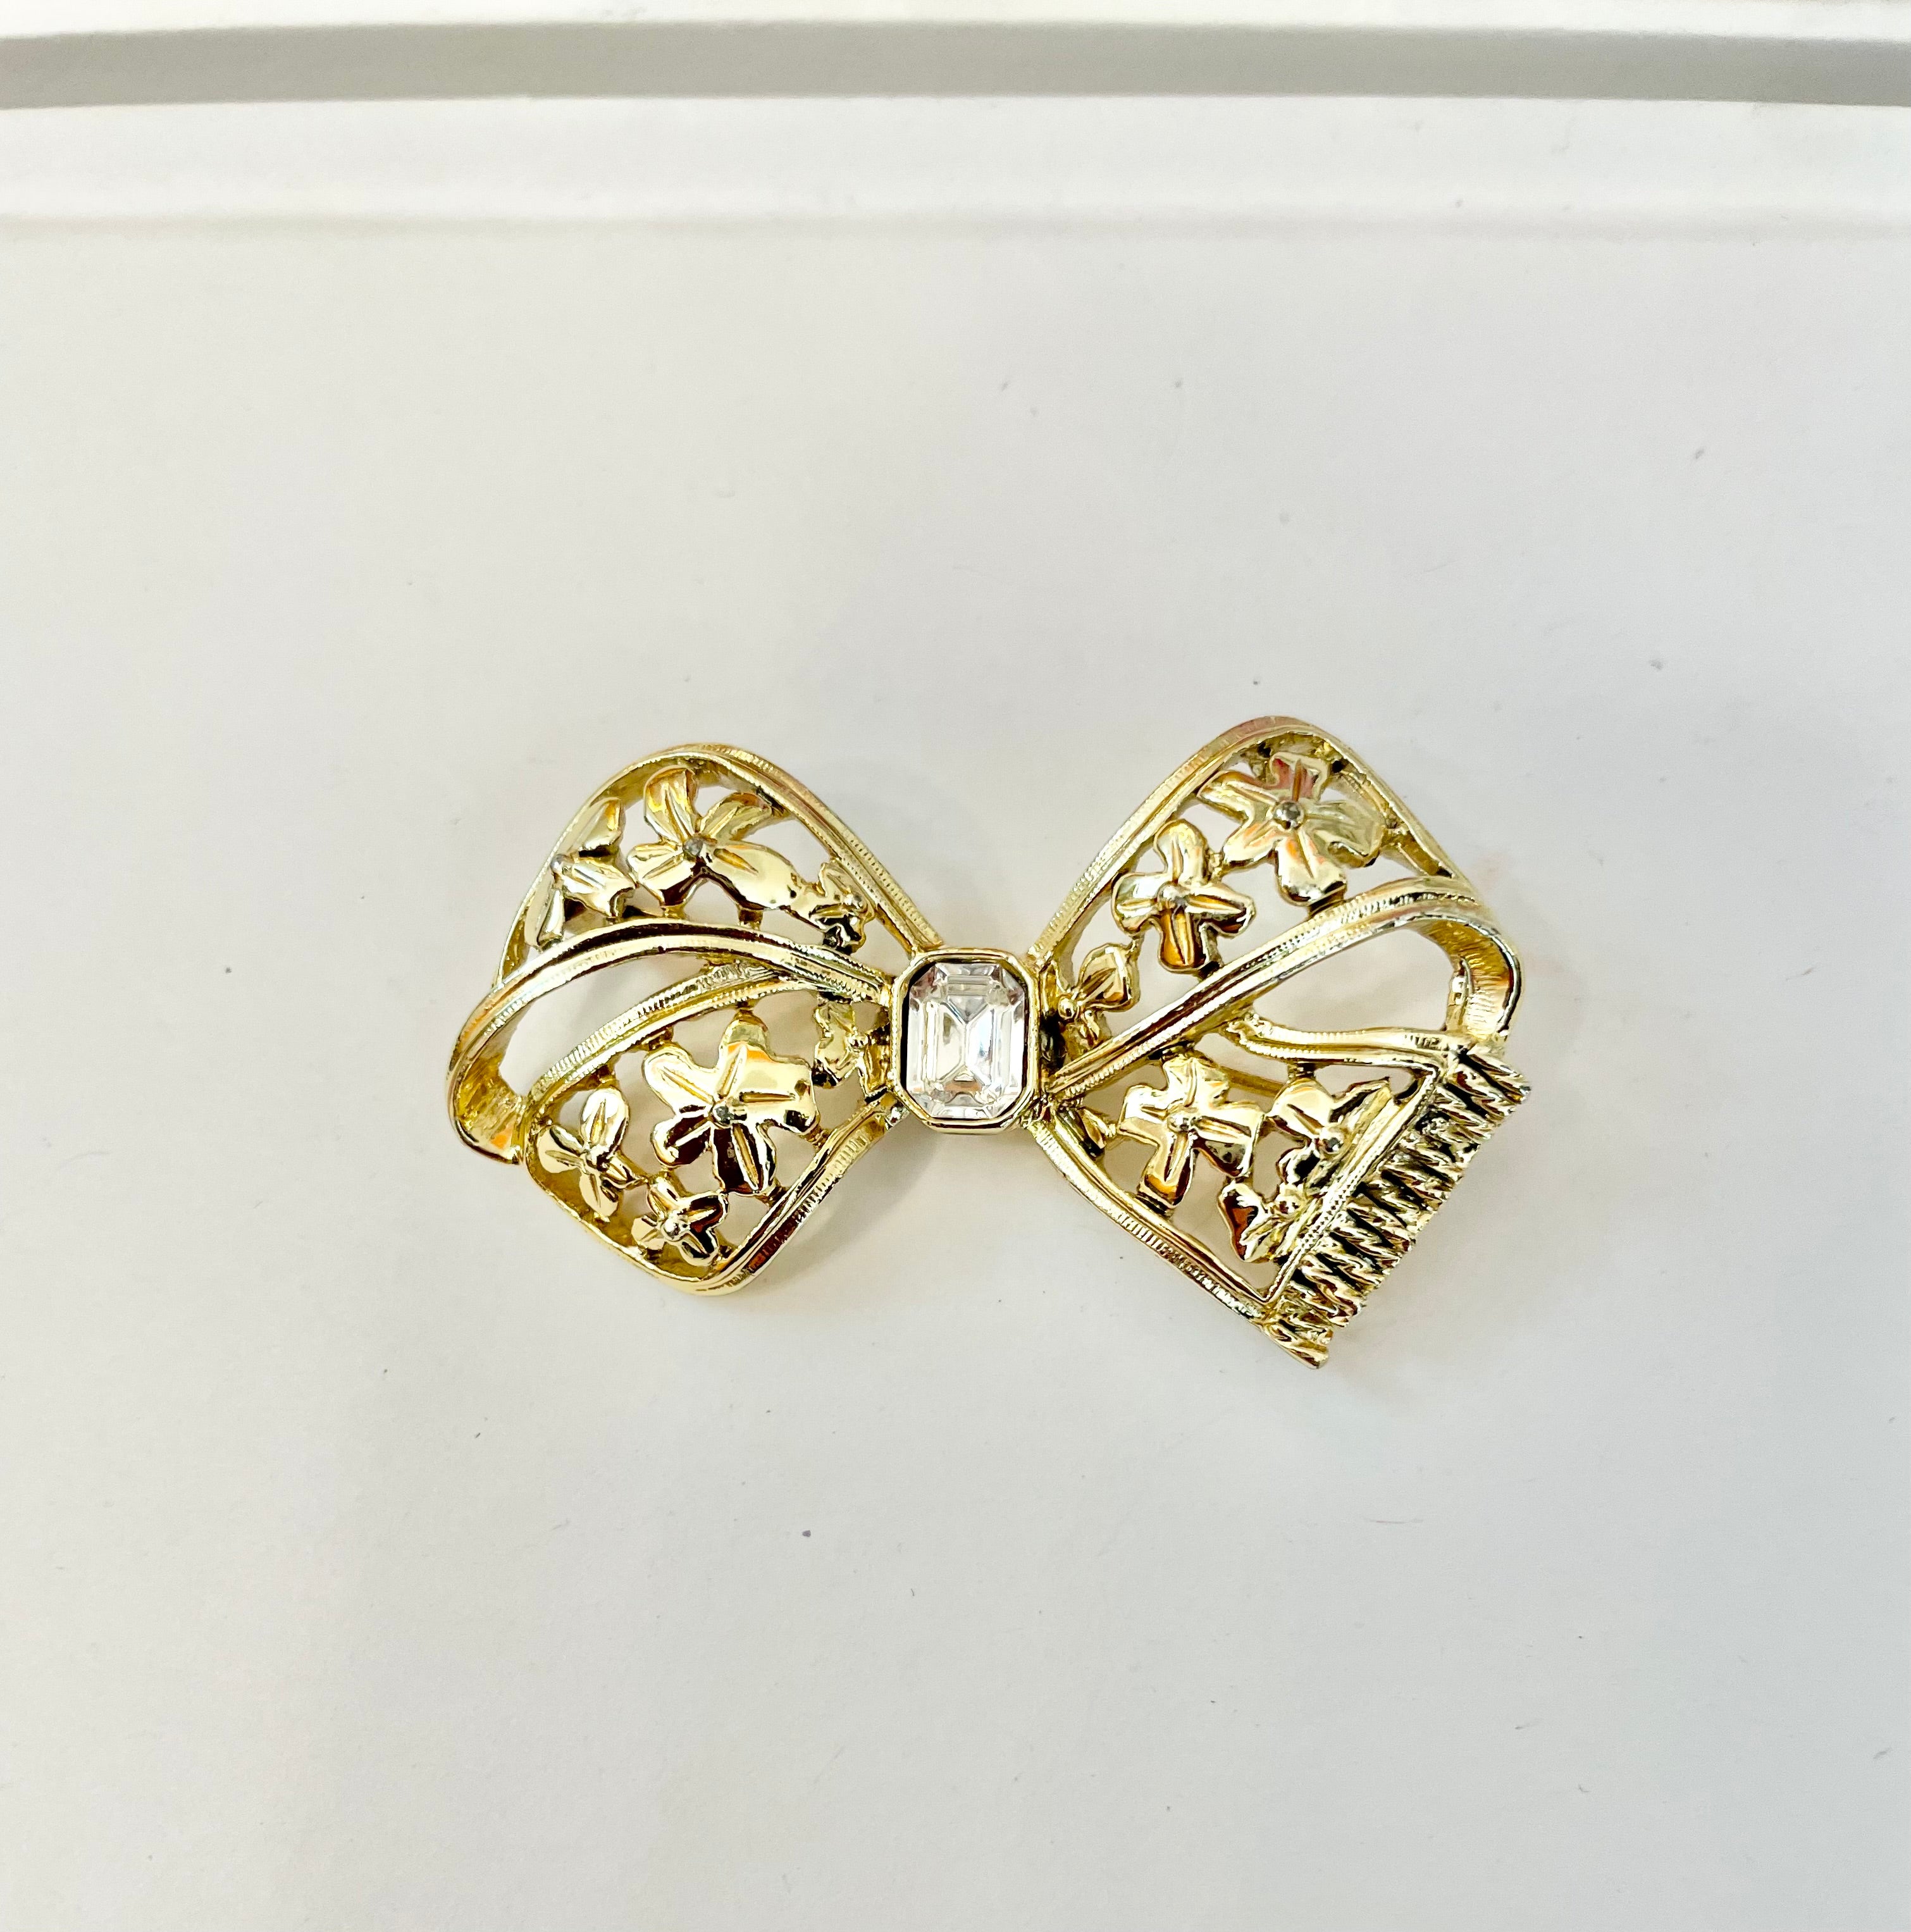 The preppy gals love a classy bow brooch!!